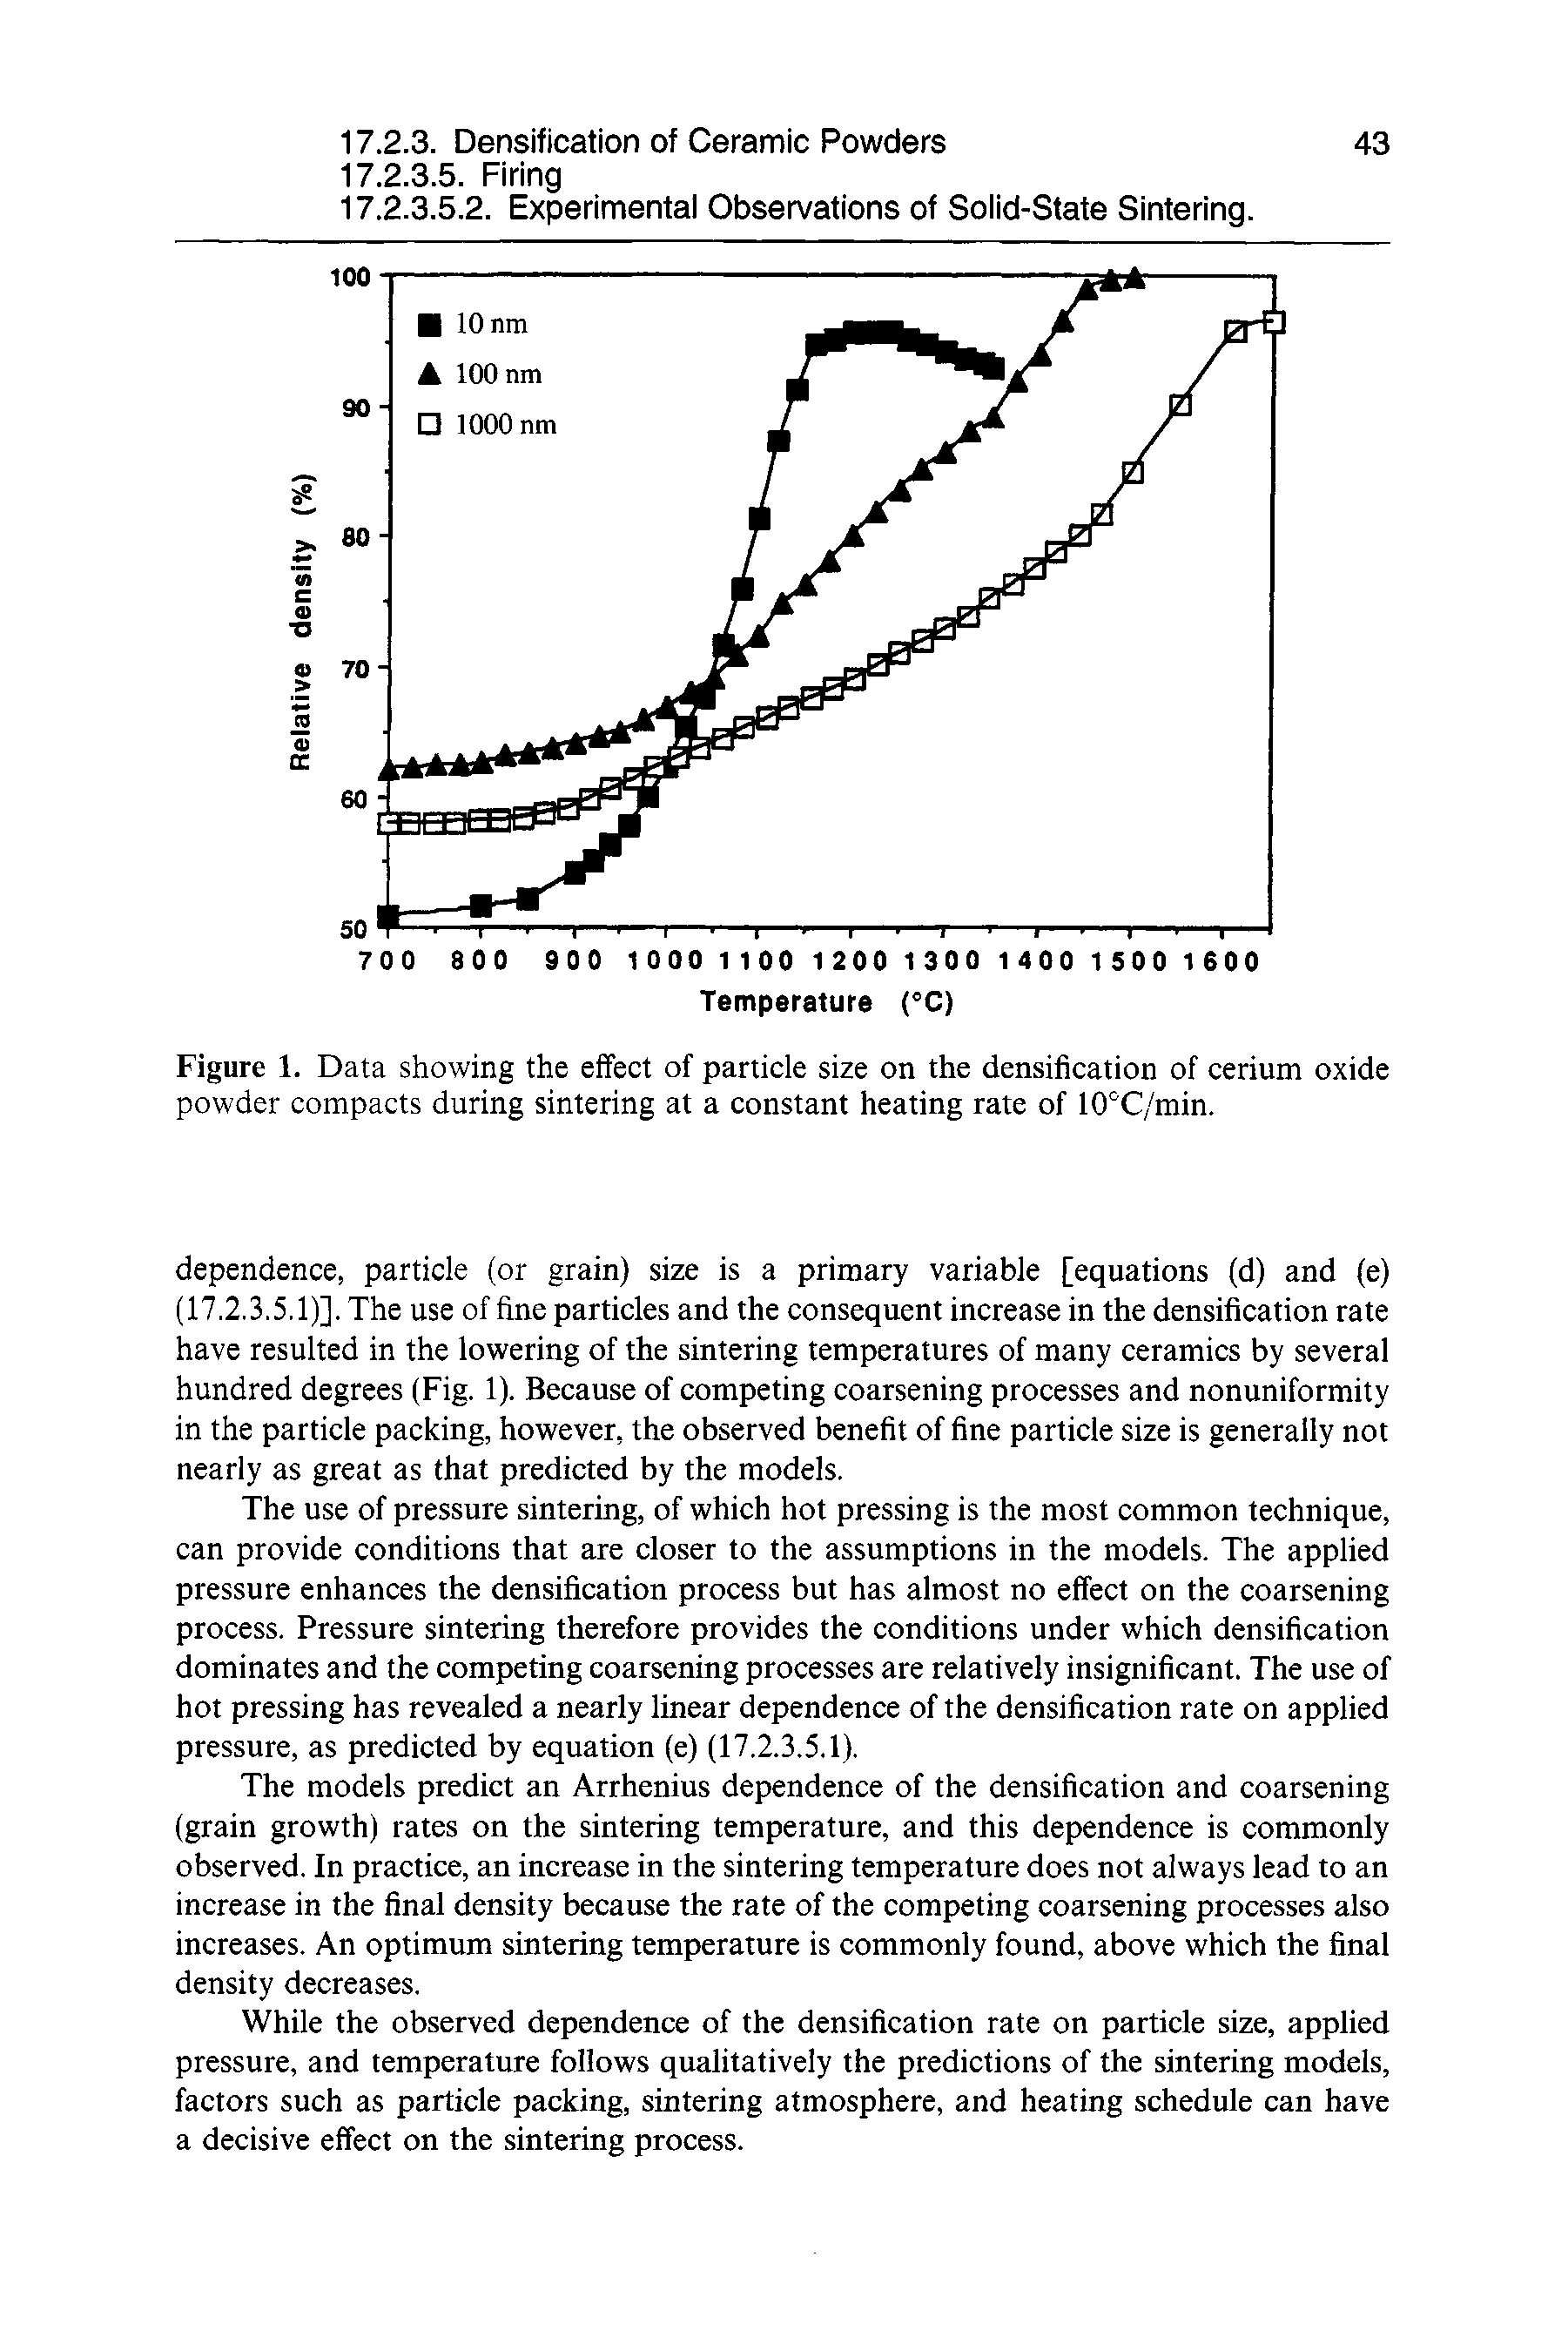 Figure 1. Data showing the effect of particle size on the densification of cerium oxide powder compacts during sintering at a constant heating rate of 10°C/min.